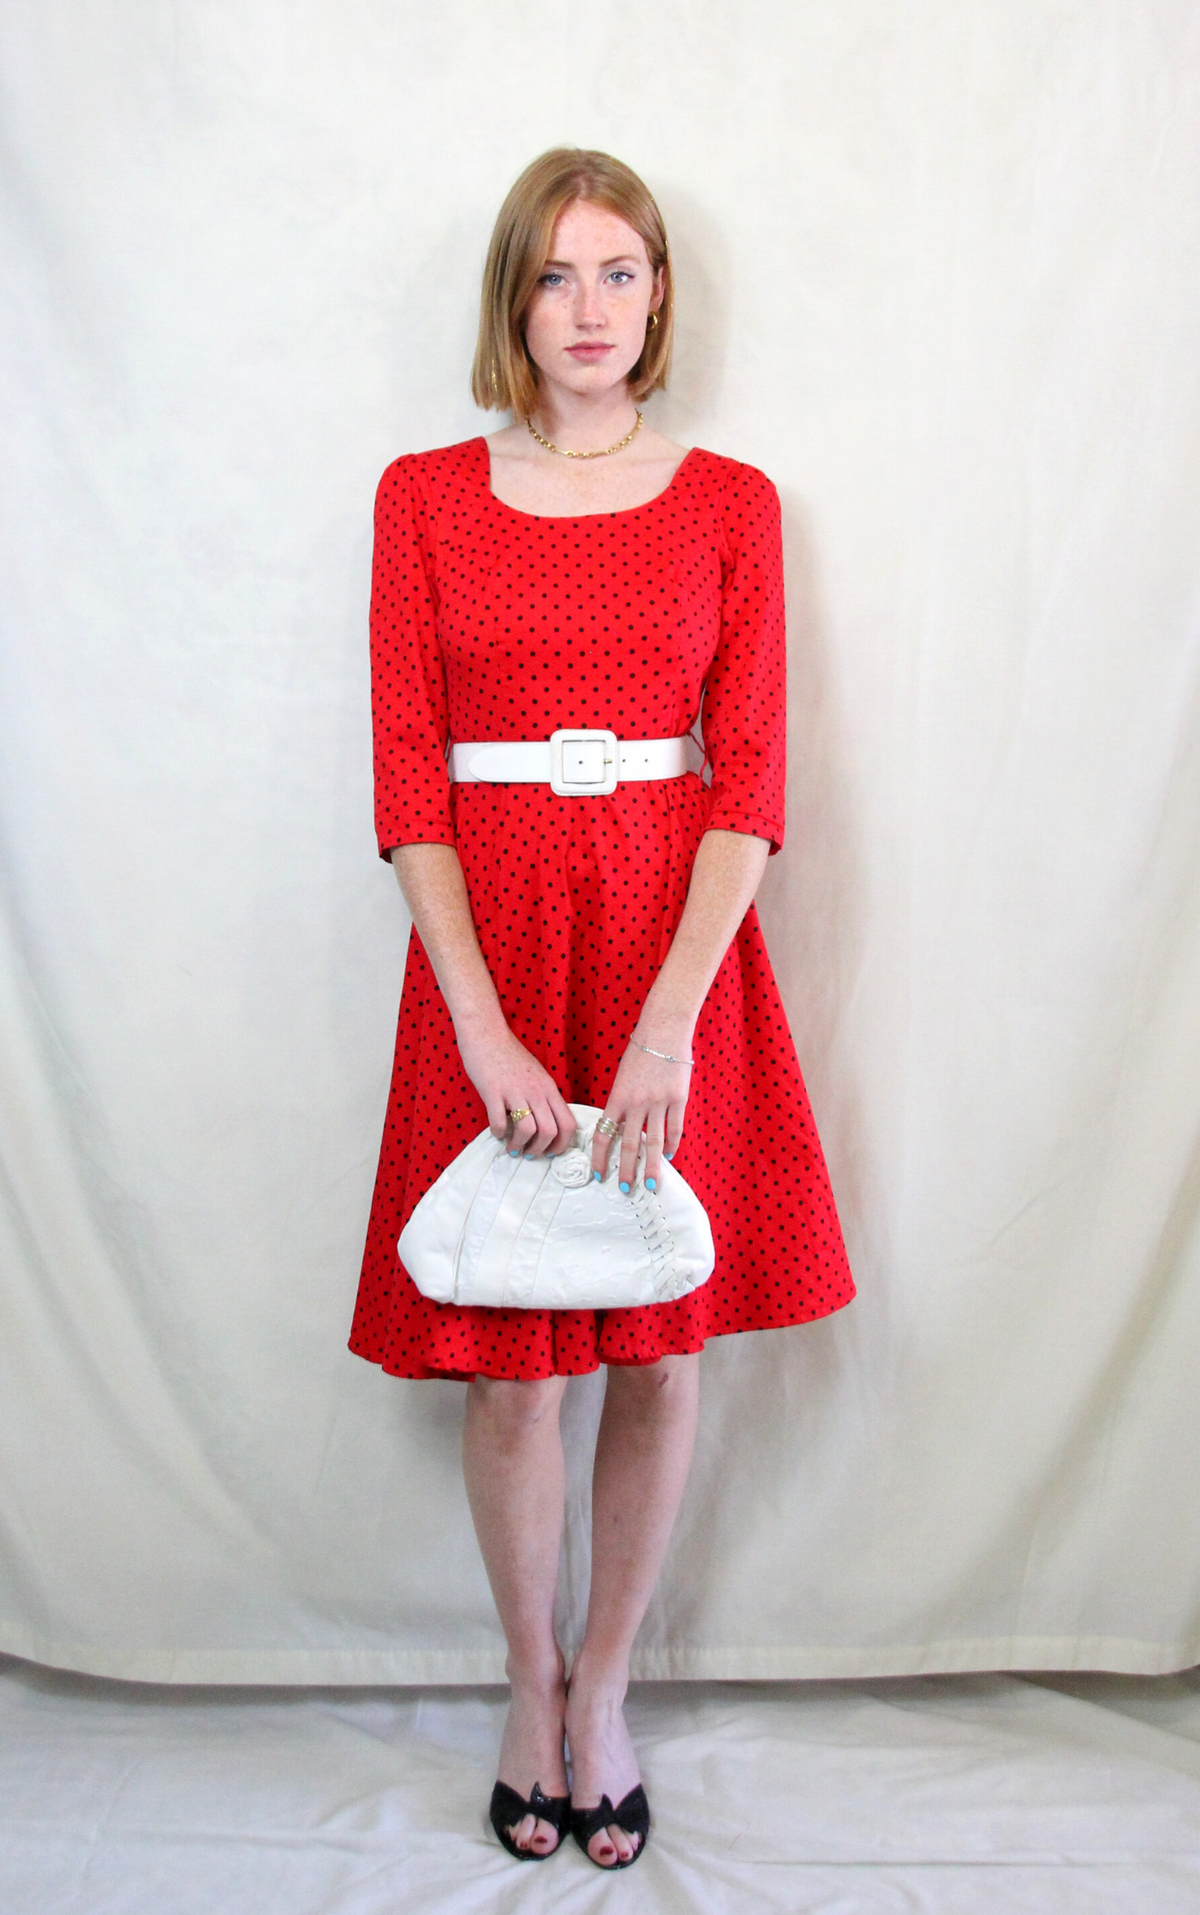 Rent 1950s swing dress in bright red and navy spot print